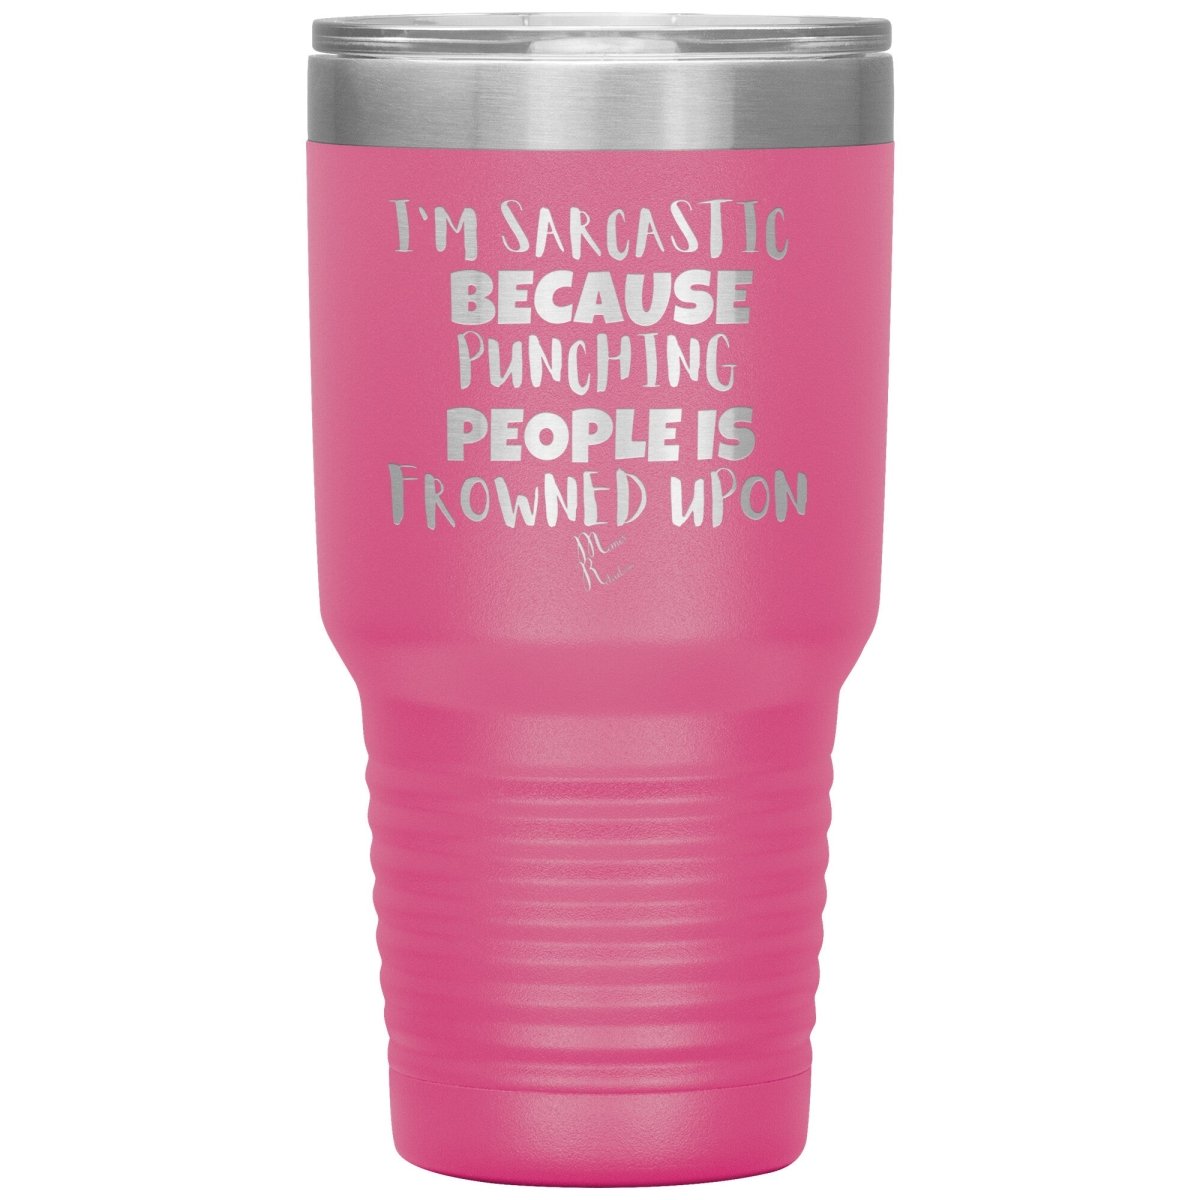 I'm Sarcastic Because Punching People is Frowned Upon Tumblers, 30oz Insulated Tumbler / Pink - MemesRetail.com